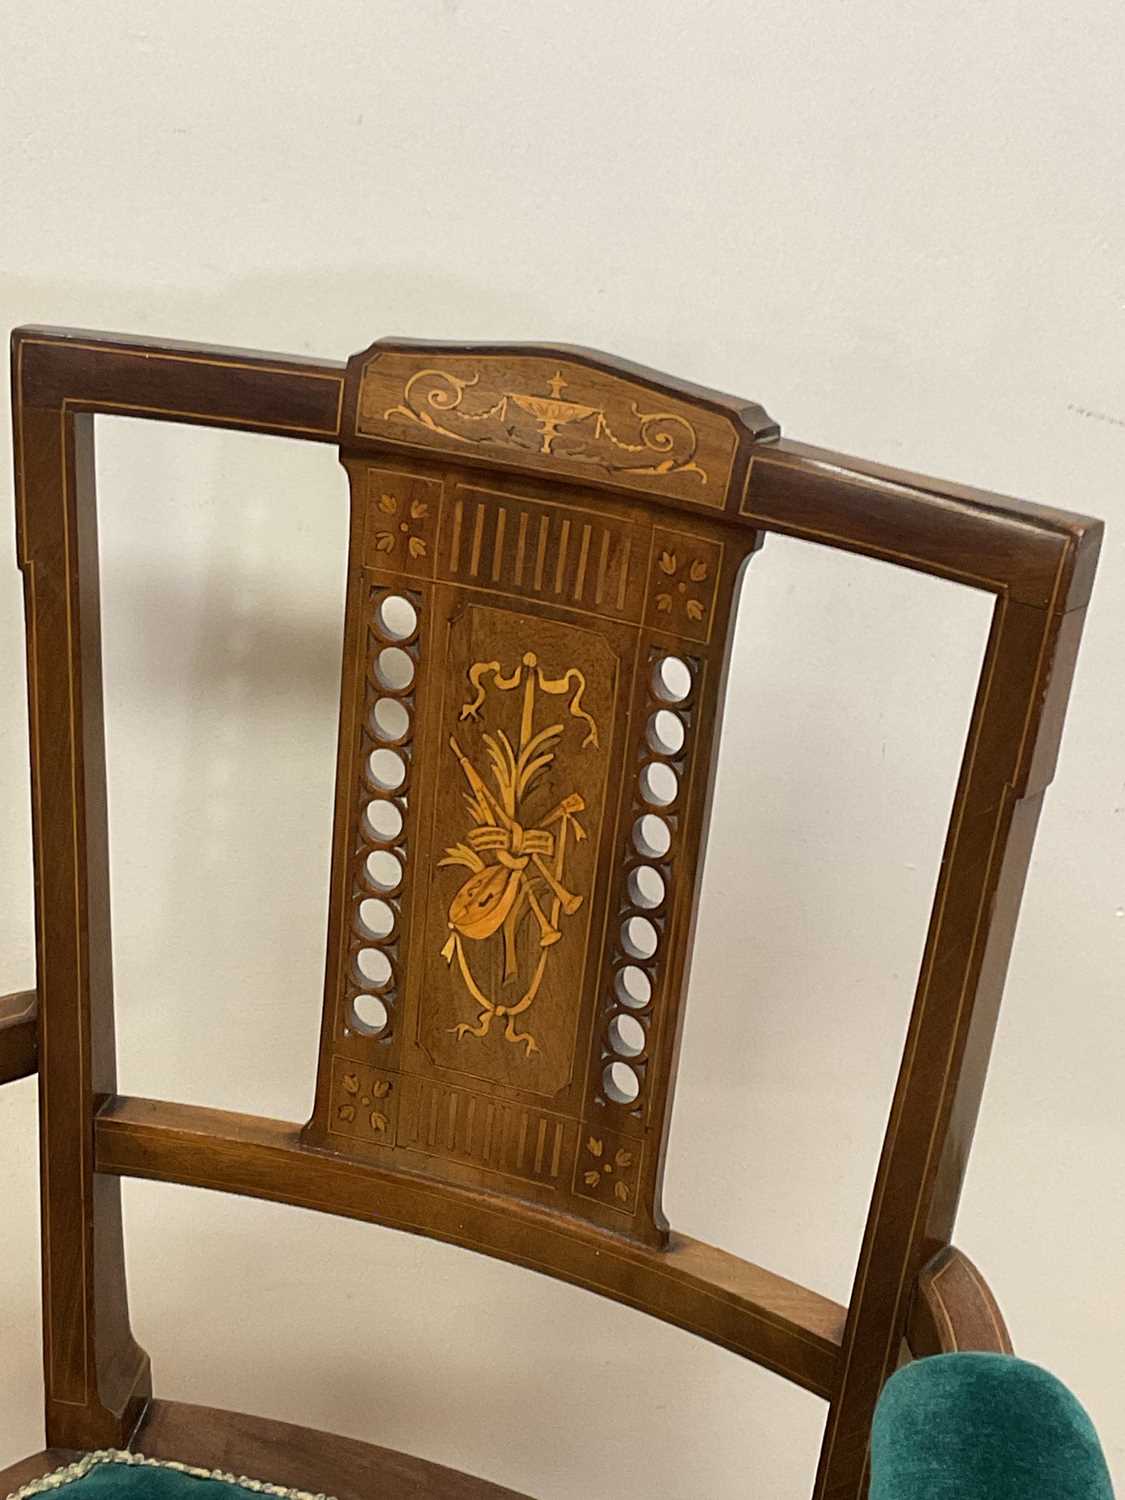 An Edwardian mahogany inlaid elbow chair. - Image 2 of 3